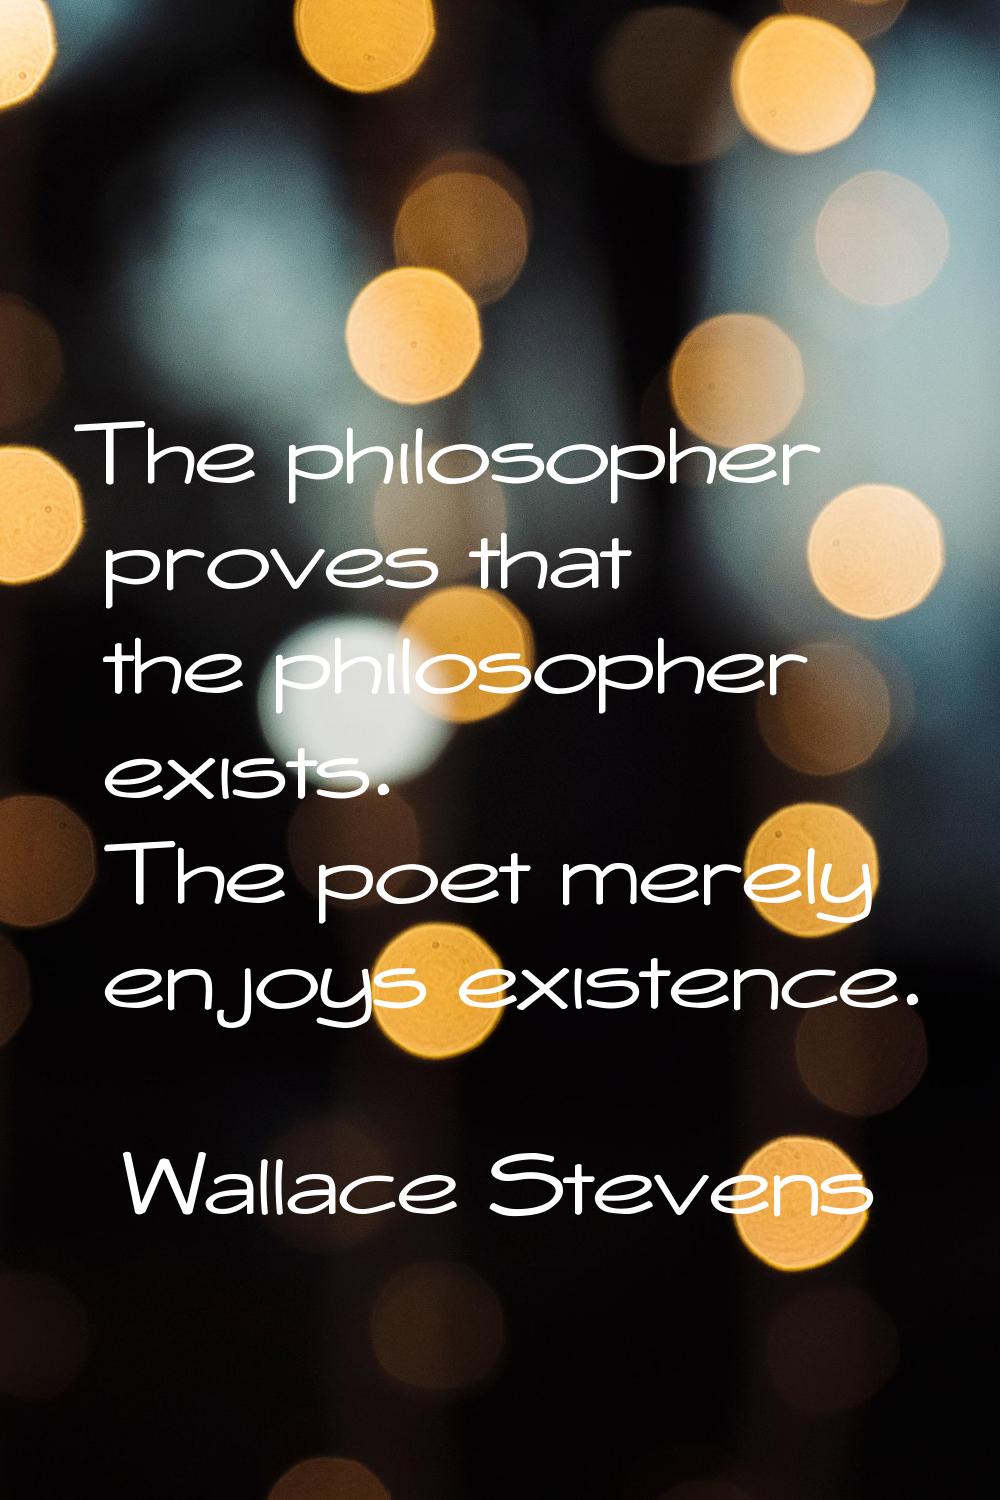 The philosopher proves that the philosopher exists. The poet merely enjoys existence.